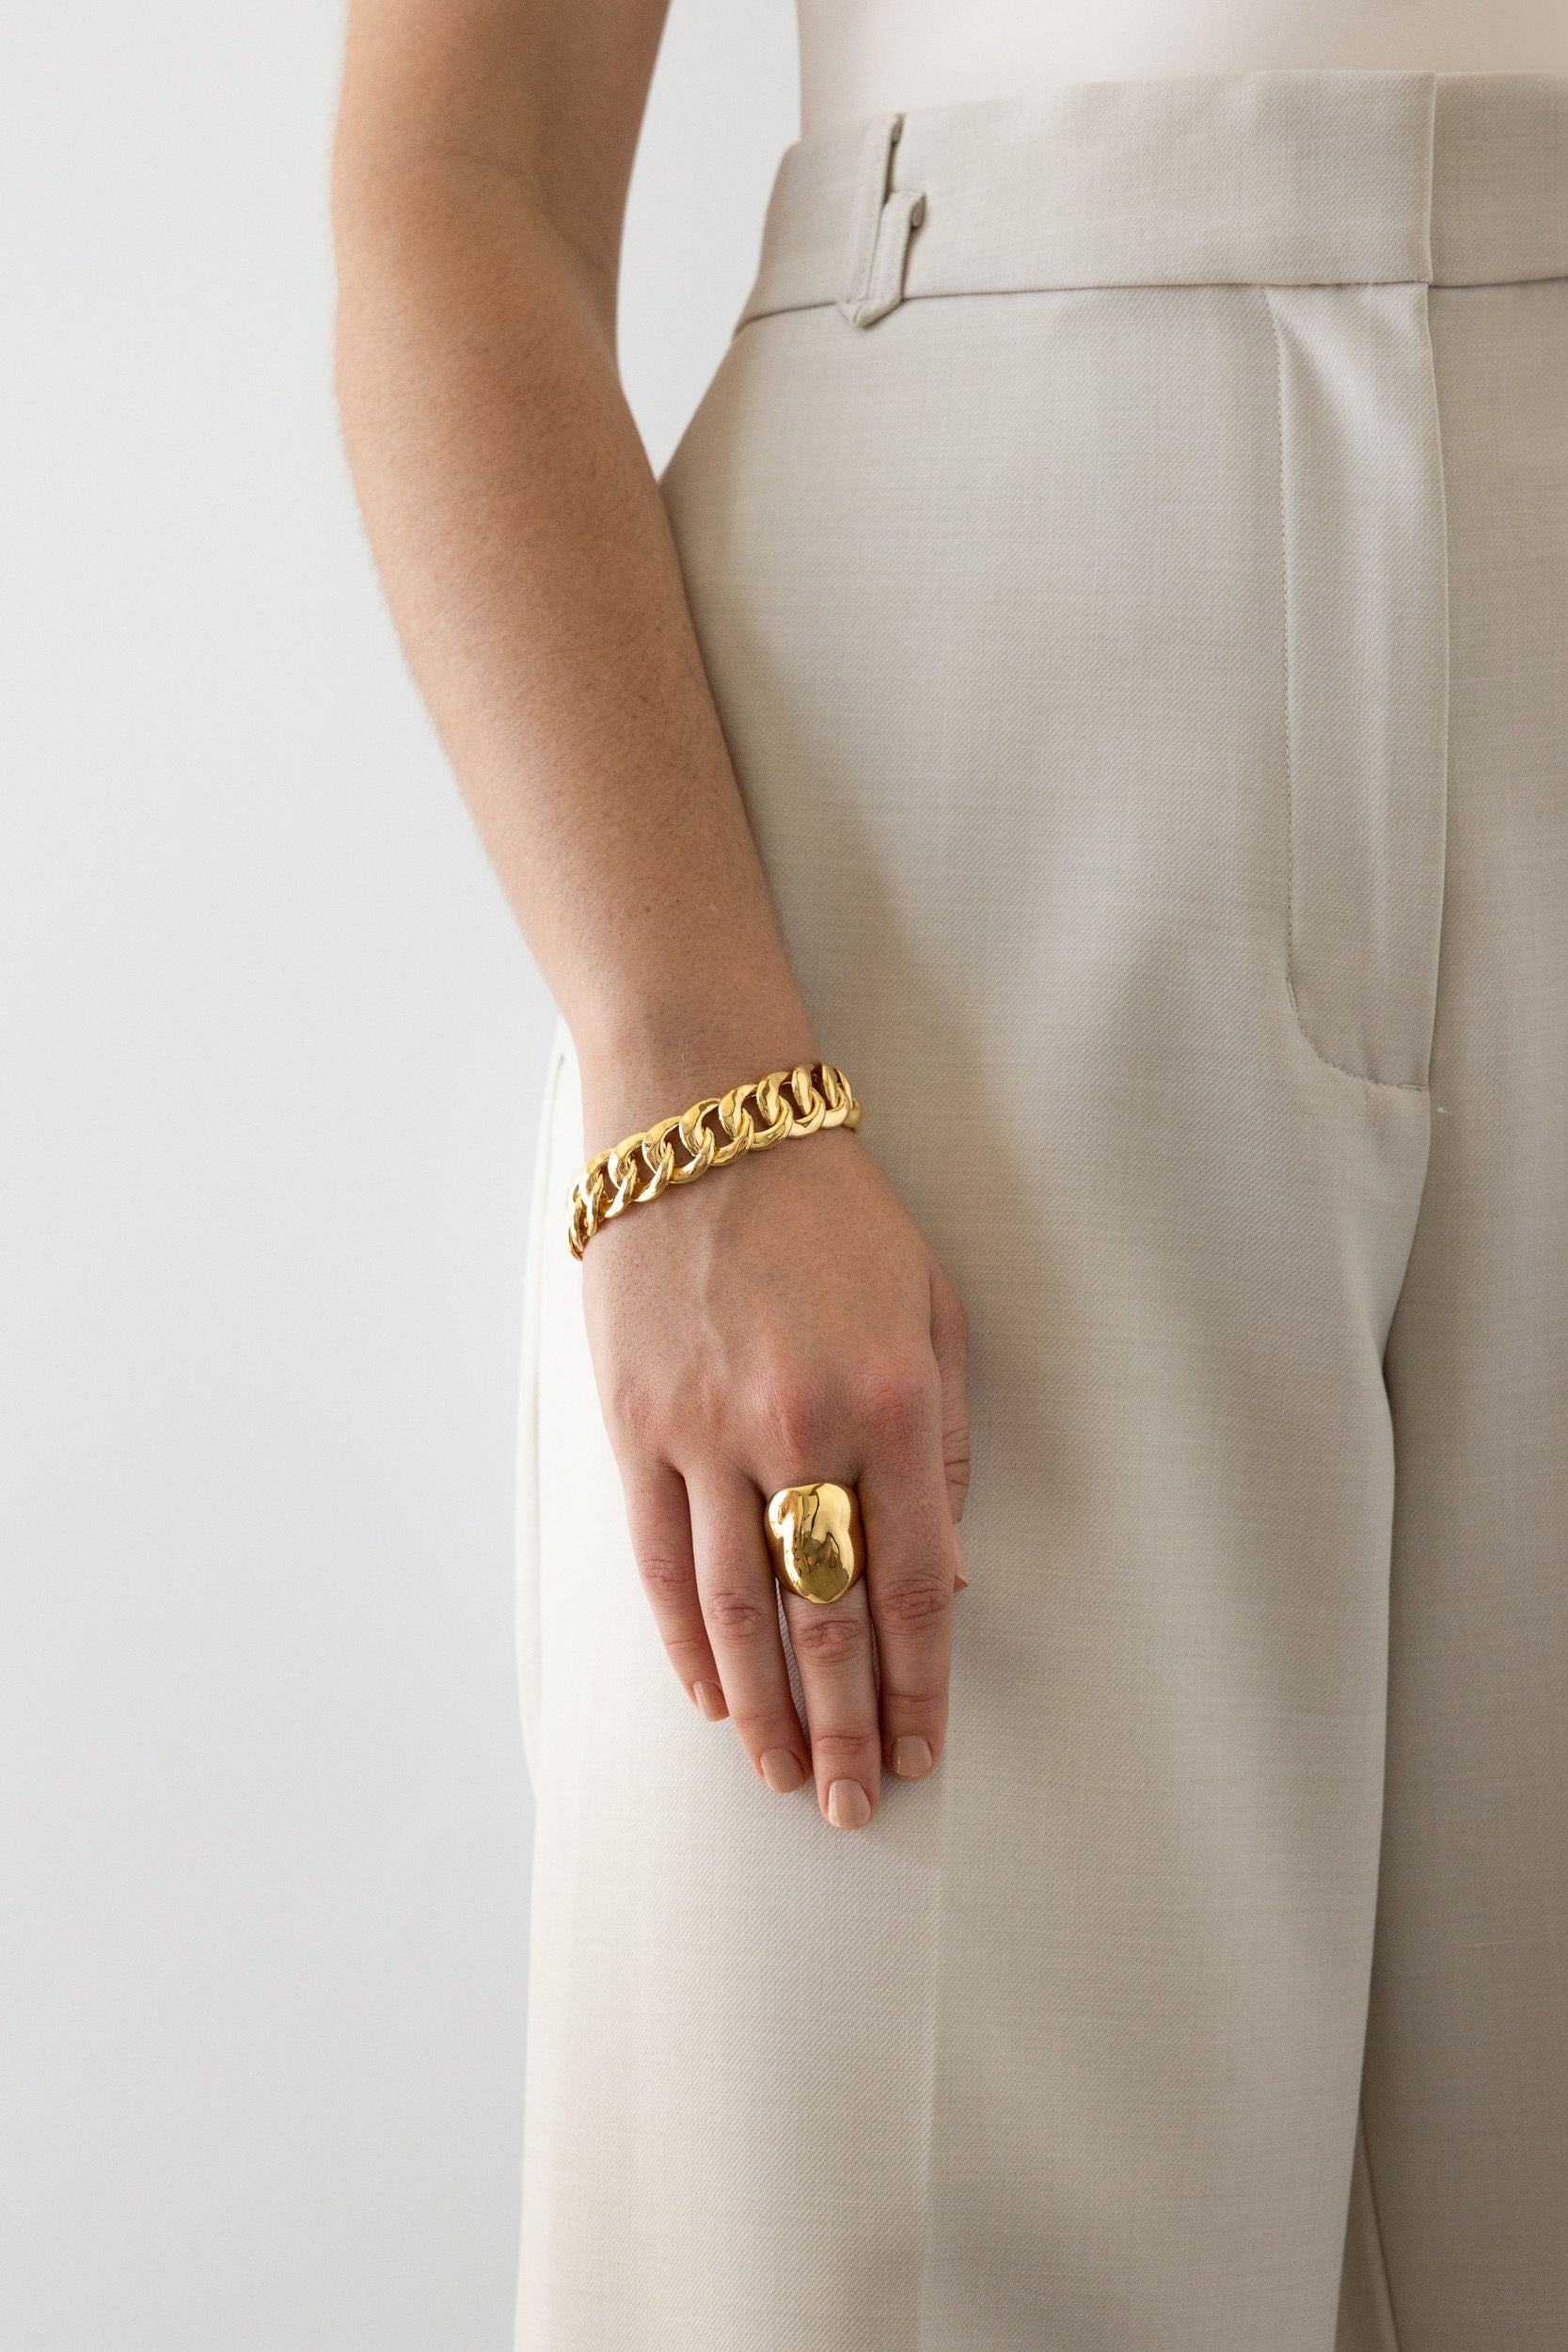 Flash Jewellery Dylan Dome Ring - 14k Vermeil